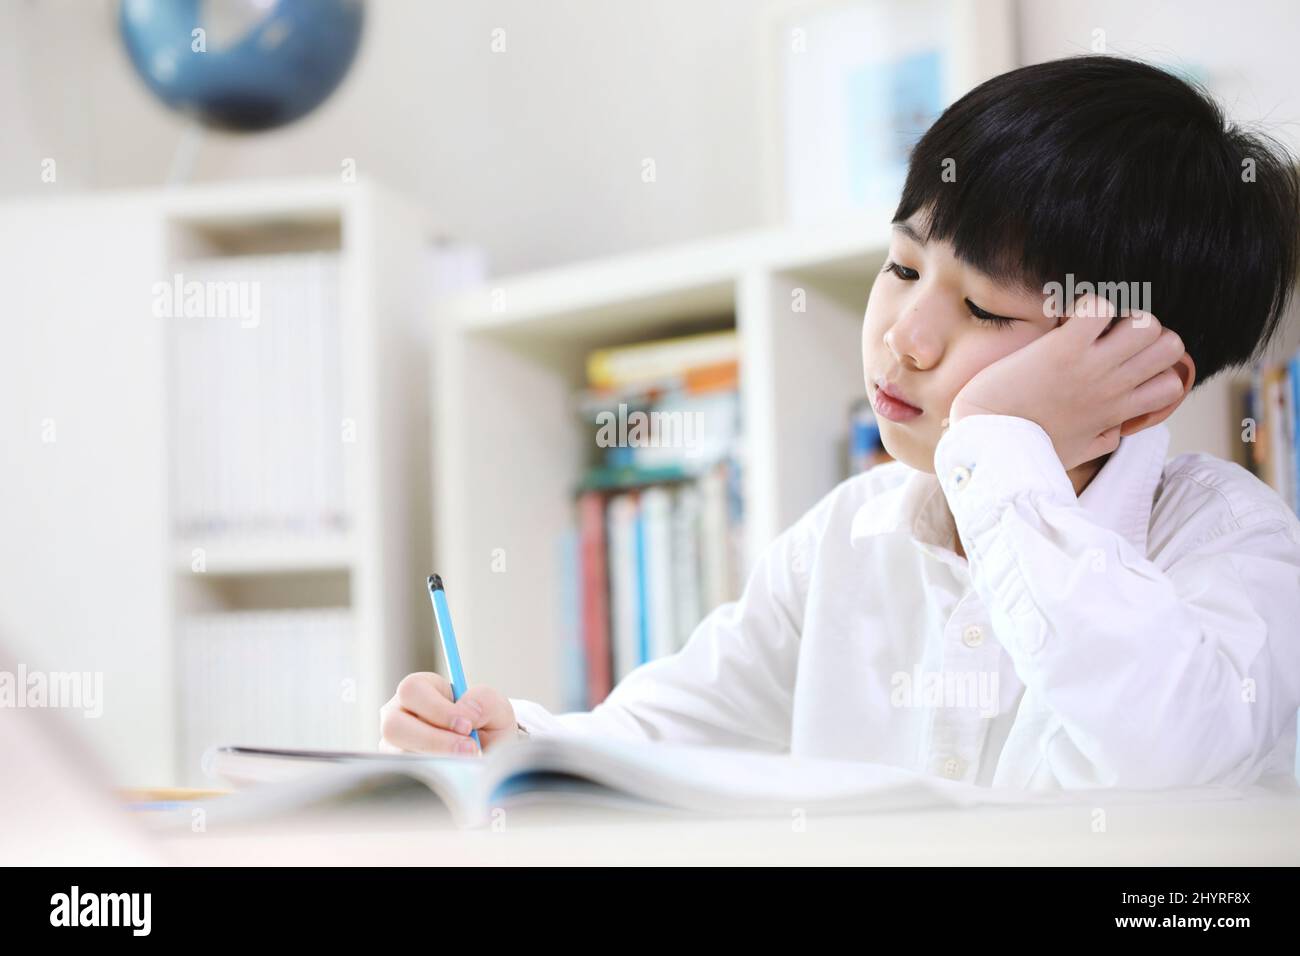 A student exhausted from the piled up of school homework and tedious study is learning by solving difficult problems with a tired look. Stock Photo